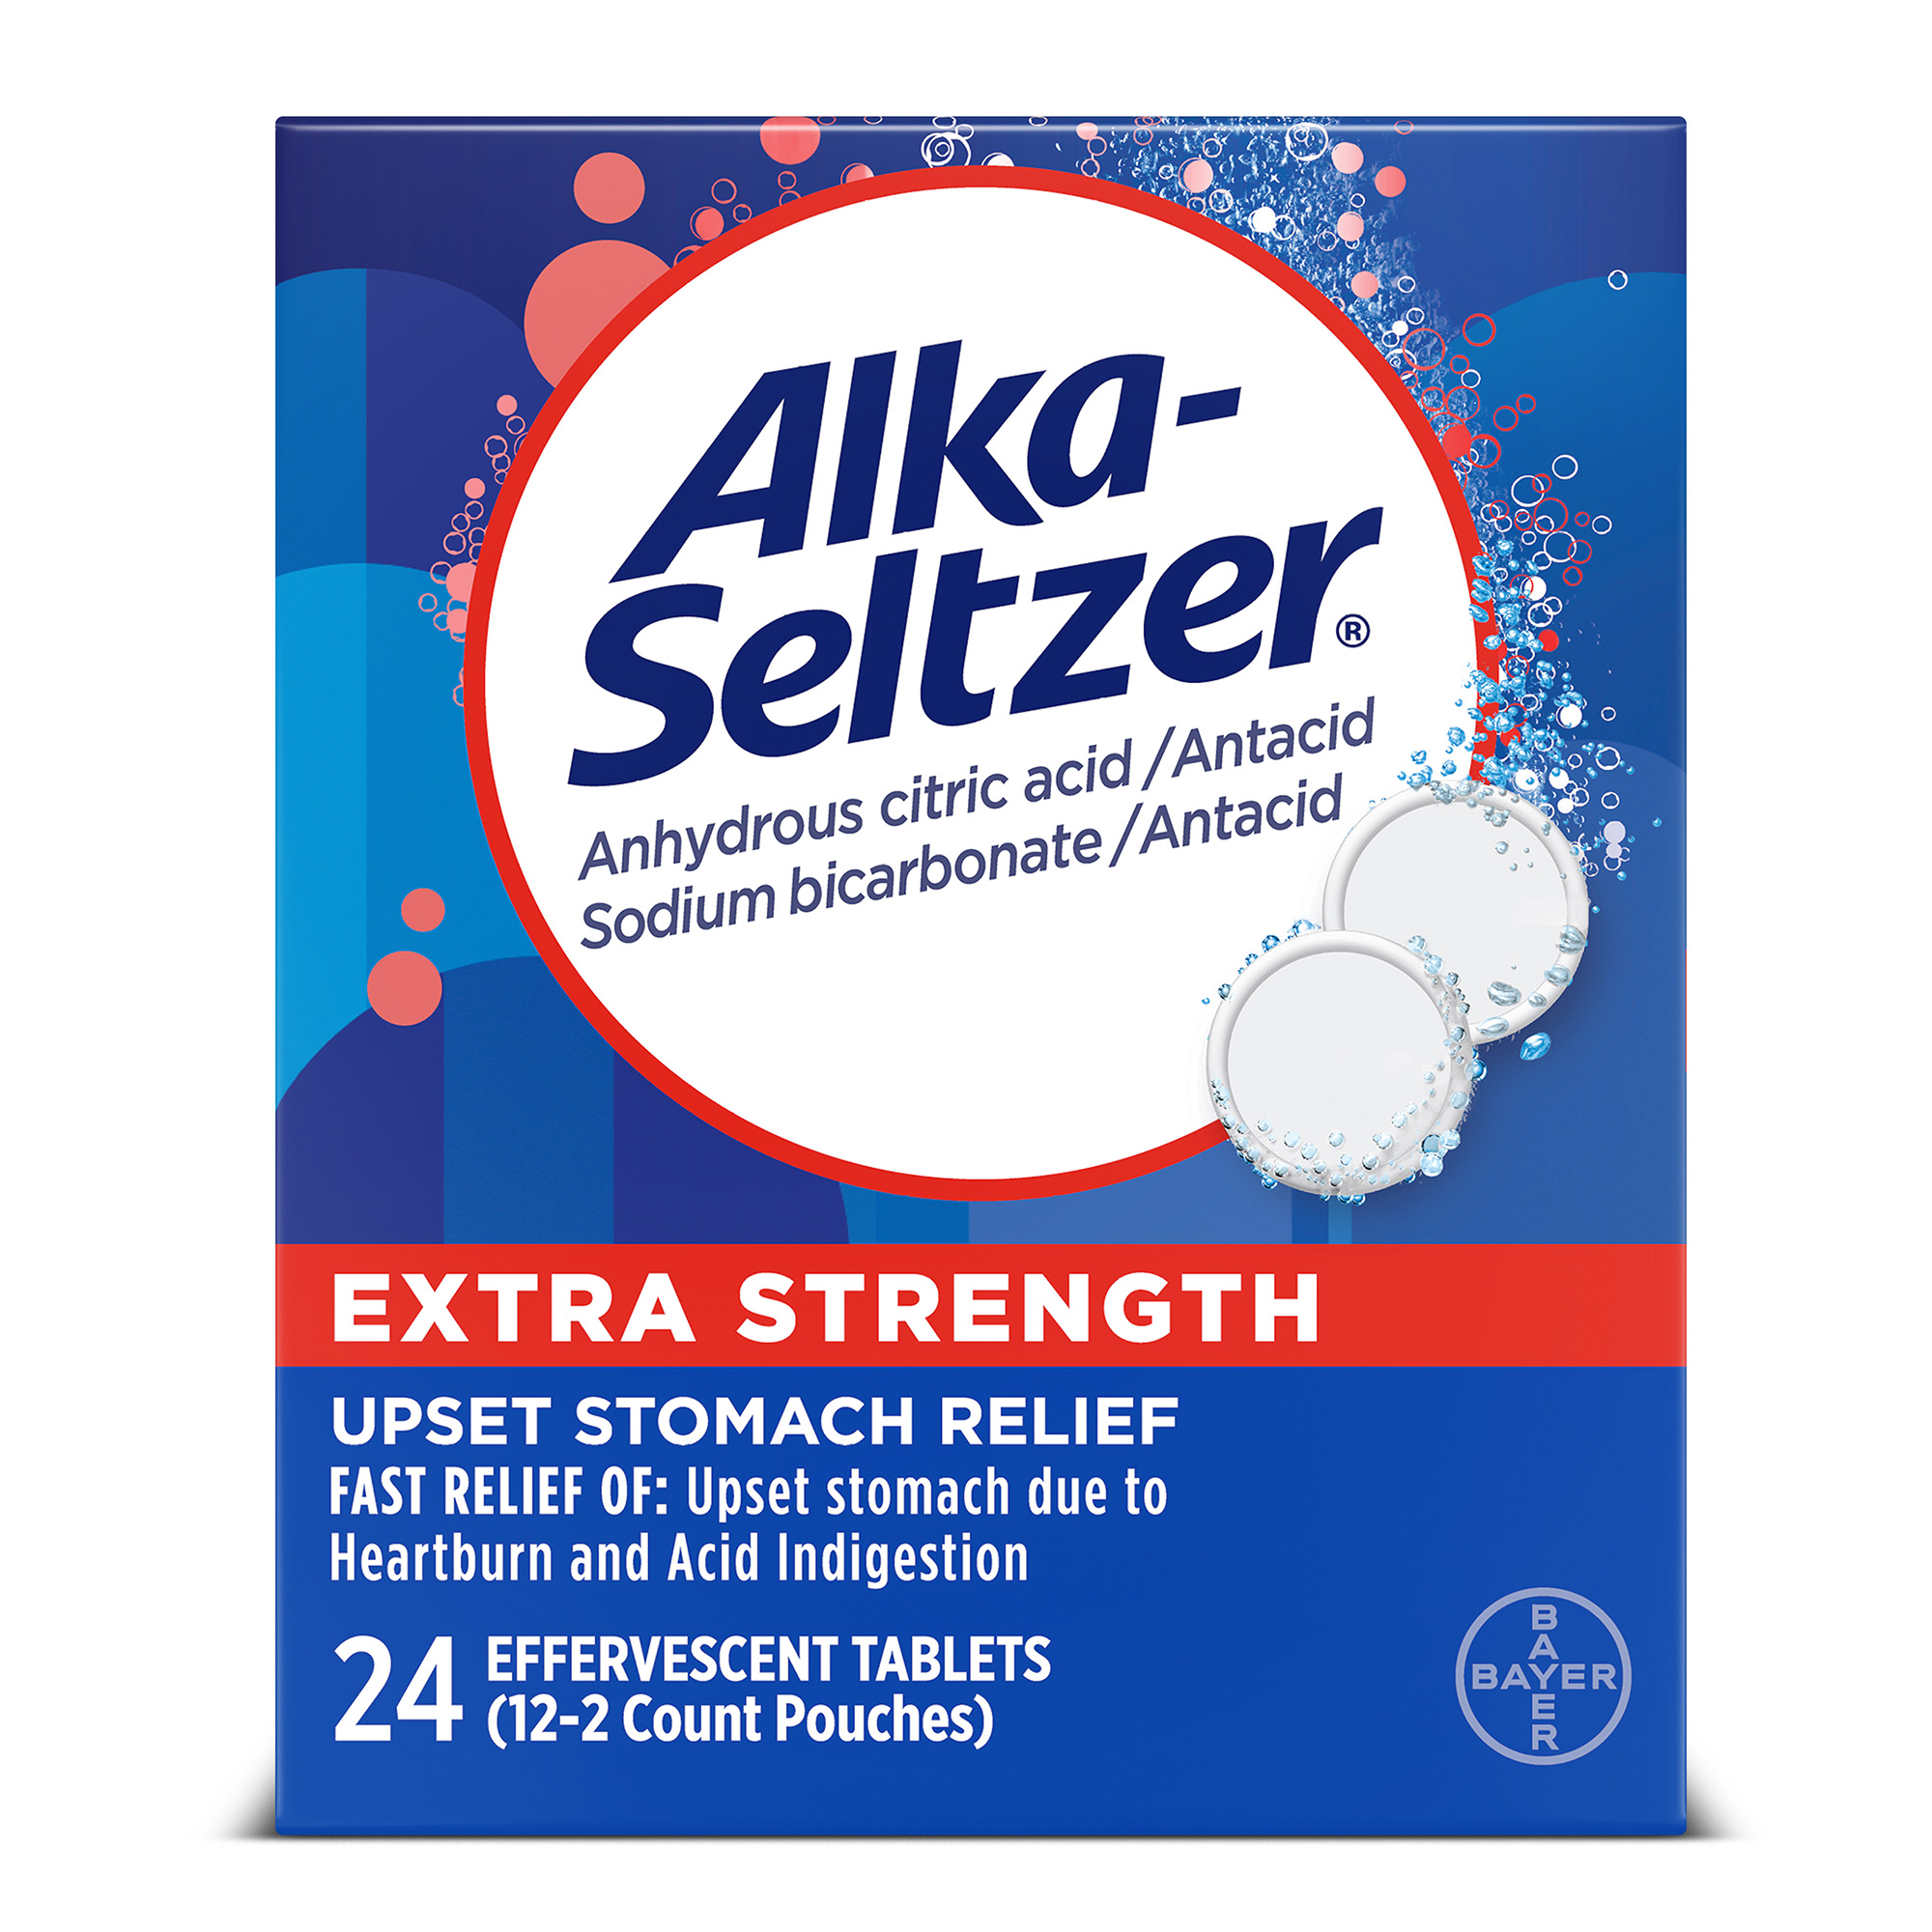 Alka-Seltzer Extra Strength Effervescent Heartburn Relief Tablets, 24 Ct - image 1 of 8